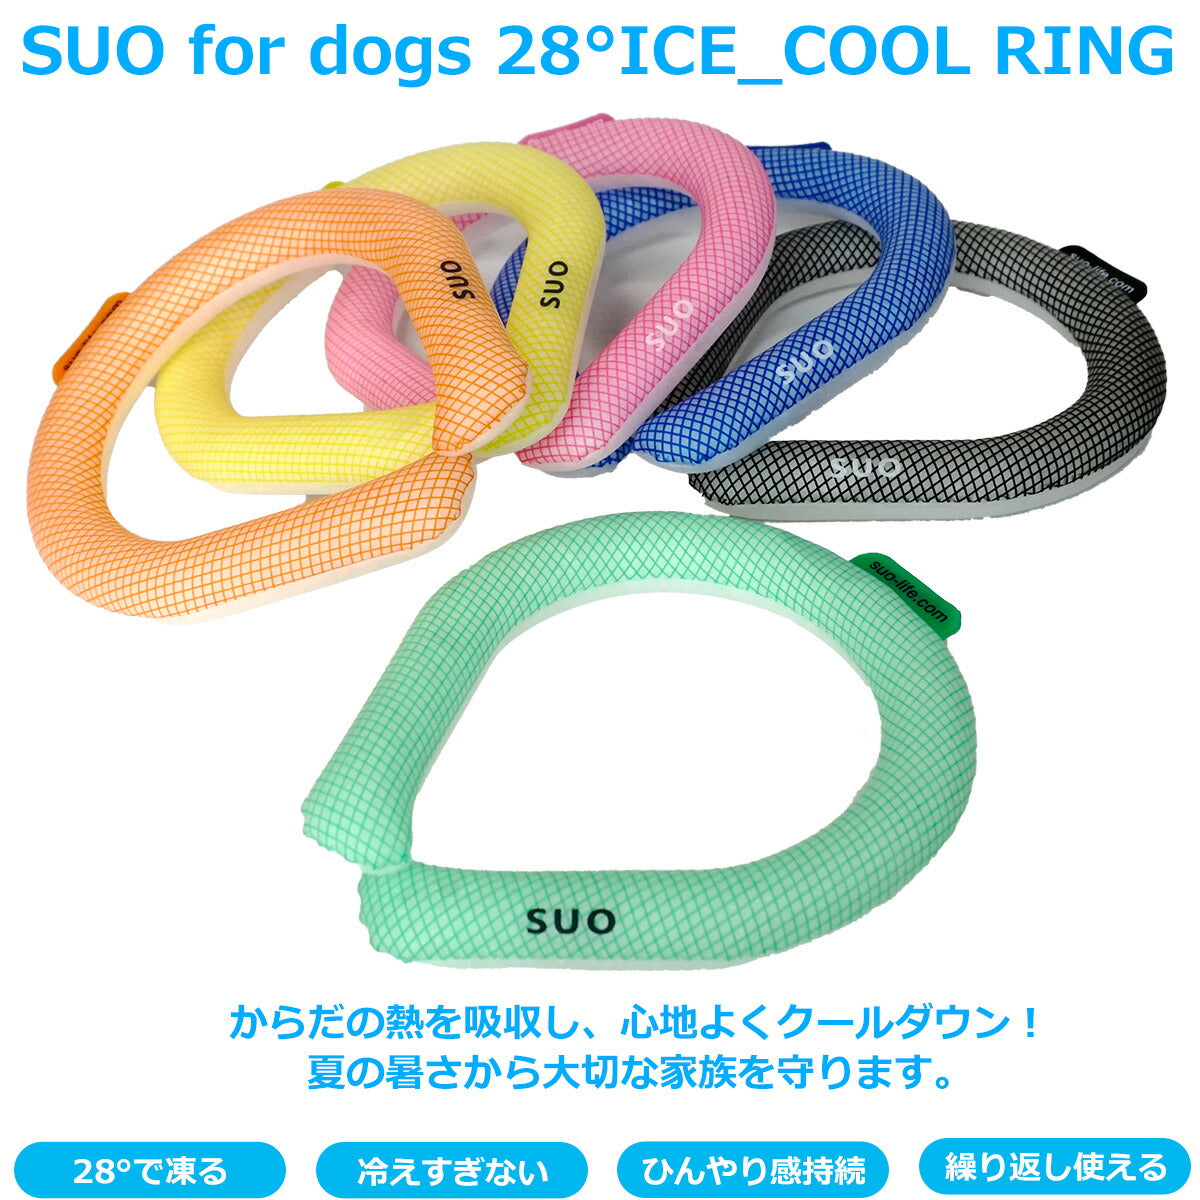 SUO for dogs 28°ICE SUOリング ボタンなし S グリーン 熱中症対策グッズ 暑さ対策 ひんやり 首 冷感 犬 大人 子供